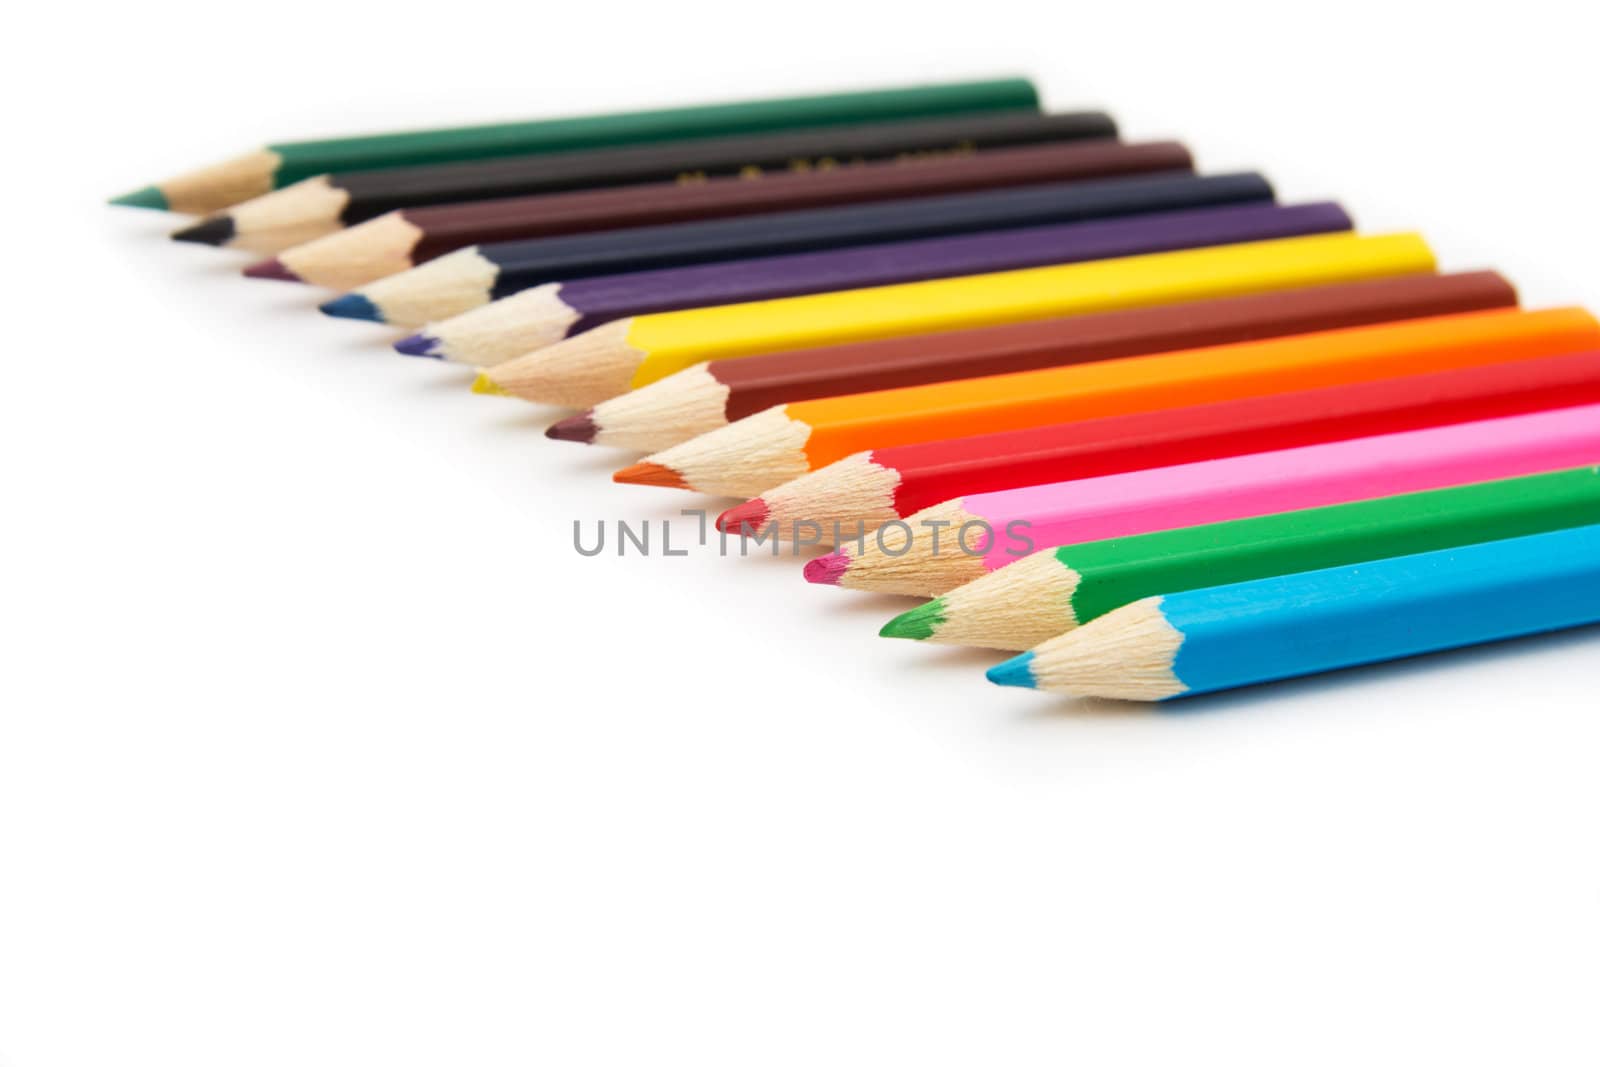 Colour pencils isolated on white background close up 